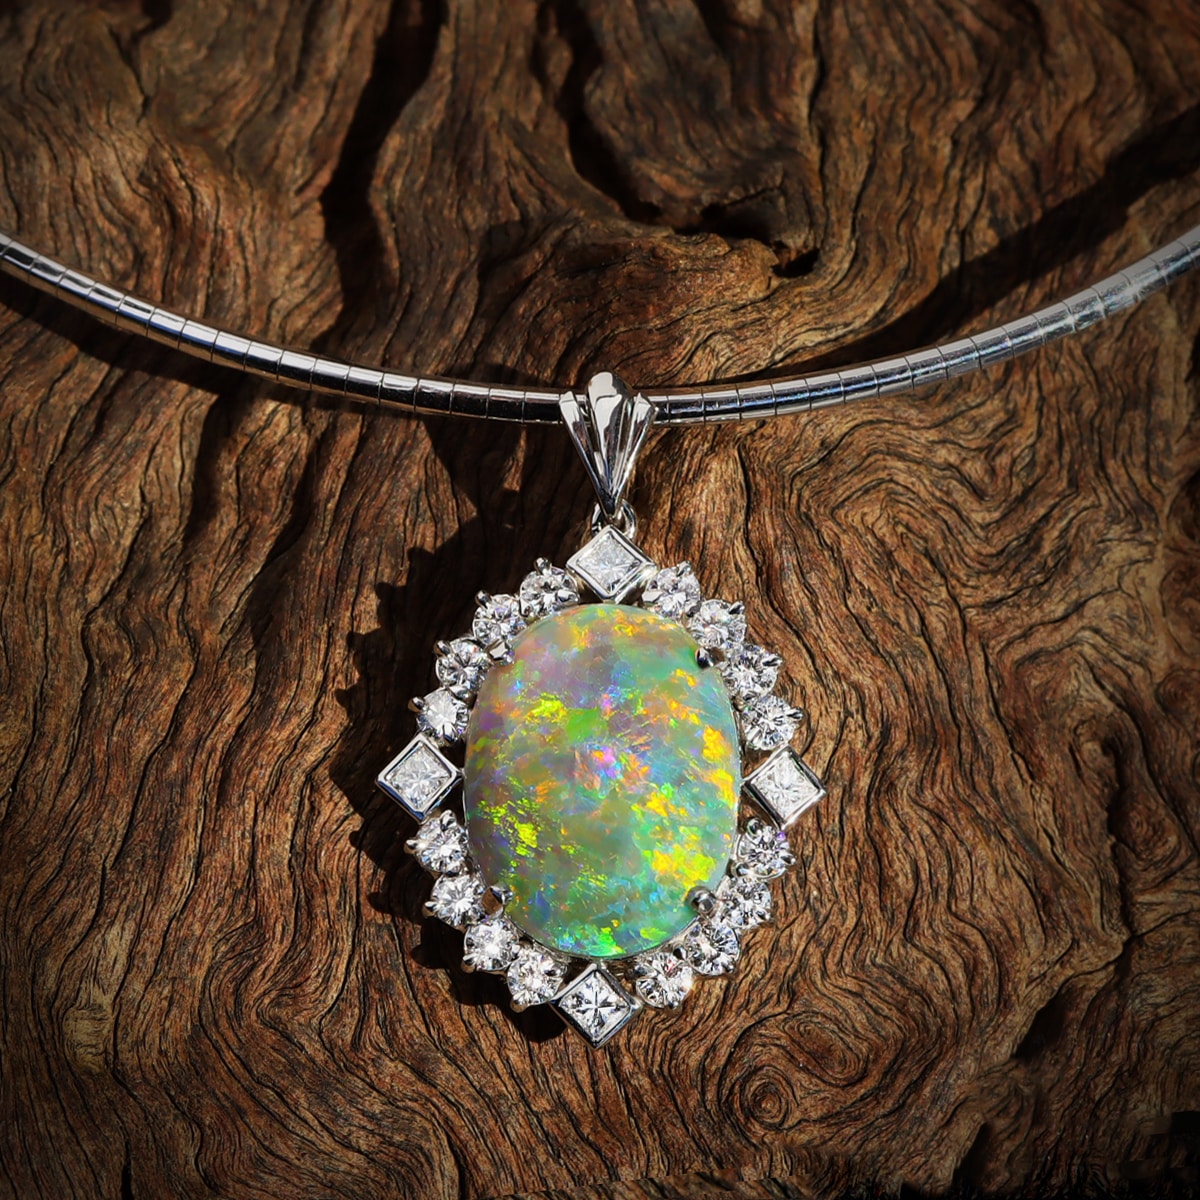 A pendant consisting of an oval-shaped solid crystal opal, surrounded by a halo of white diamonds, set in a platinum setting. The Australian opal is a high dome stone, with a flagstone pattern and vibrant flashes of greens, oranges, and yellows. The pendant includes a white gold chain and is resting on a dark wood background.